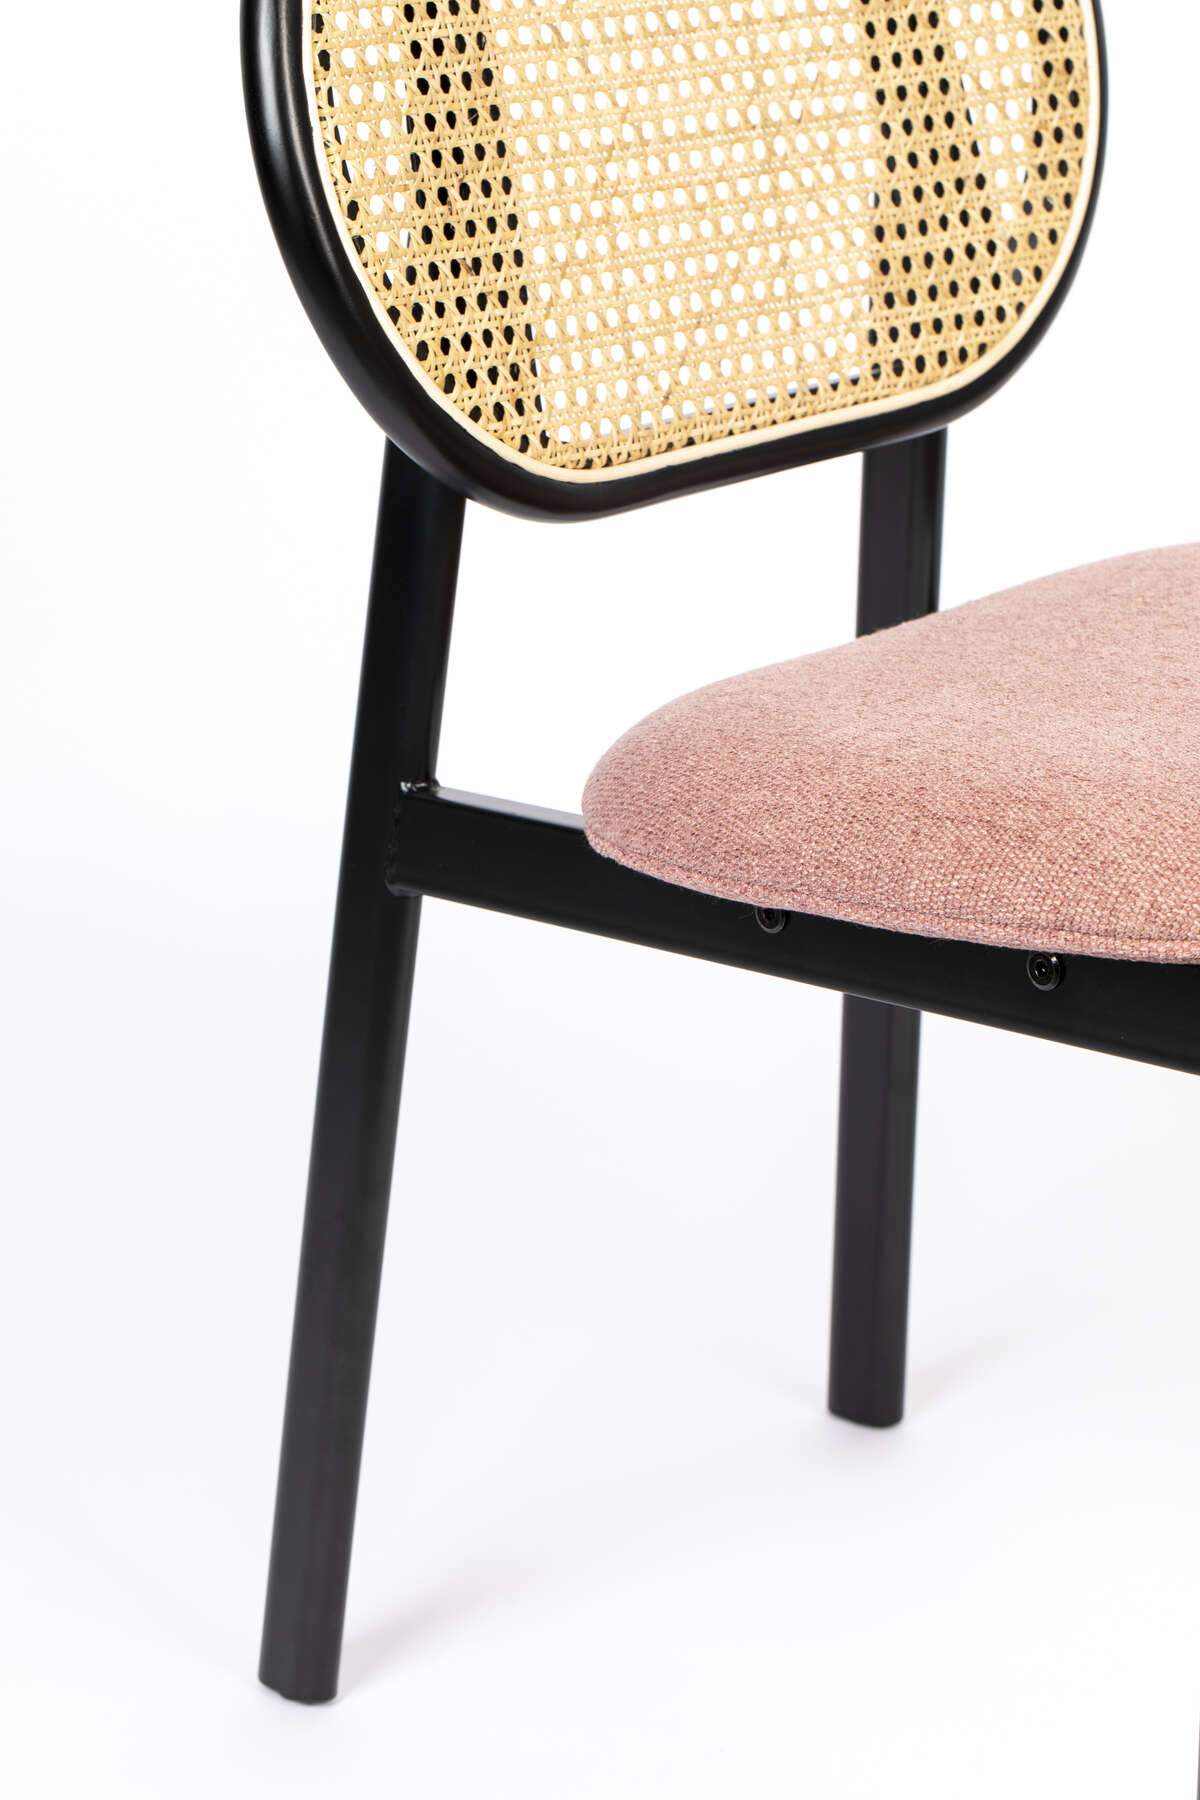 SPIKE chair pink with rattan backrest, Zuiver, Eye on Design